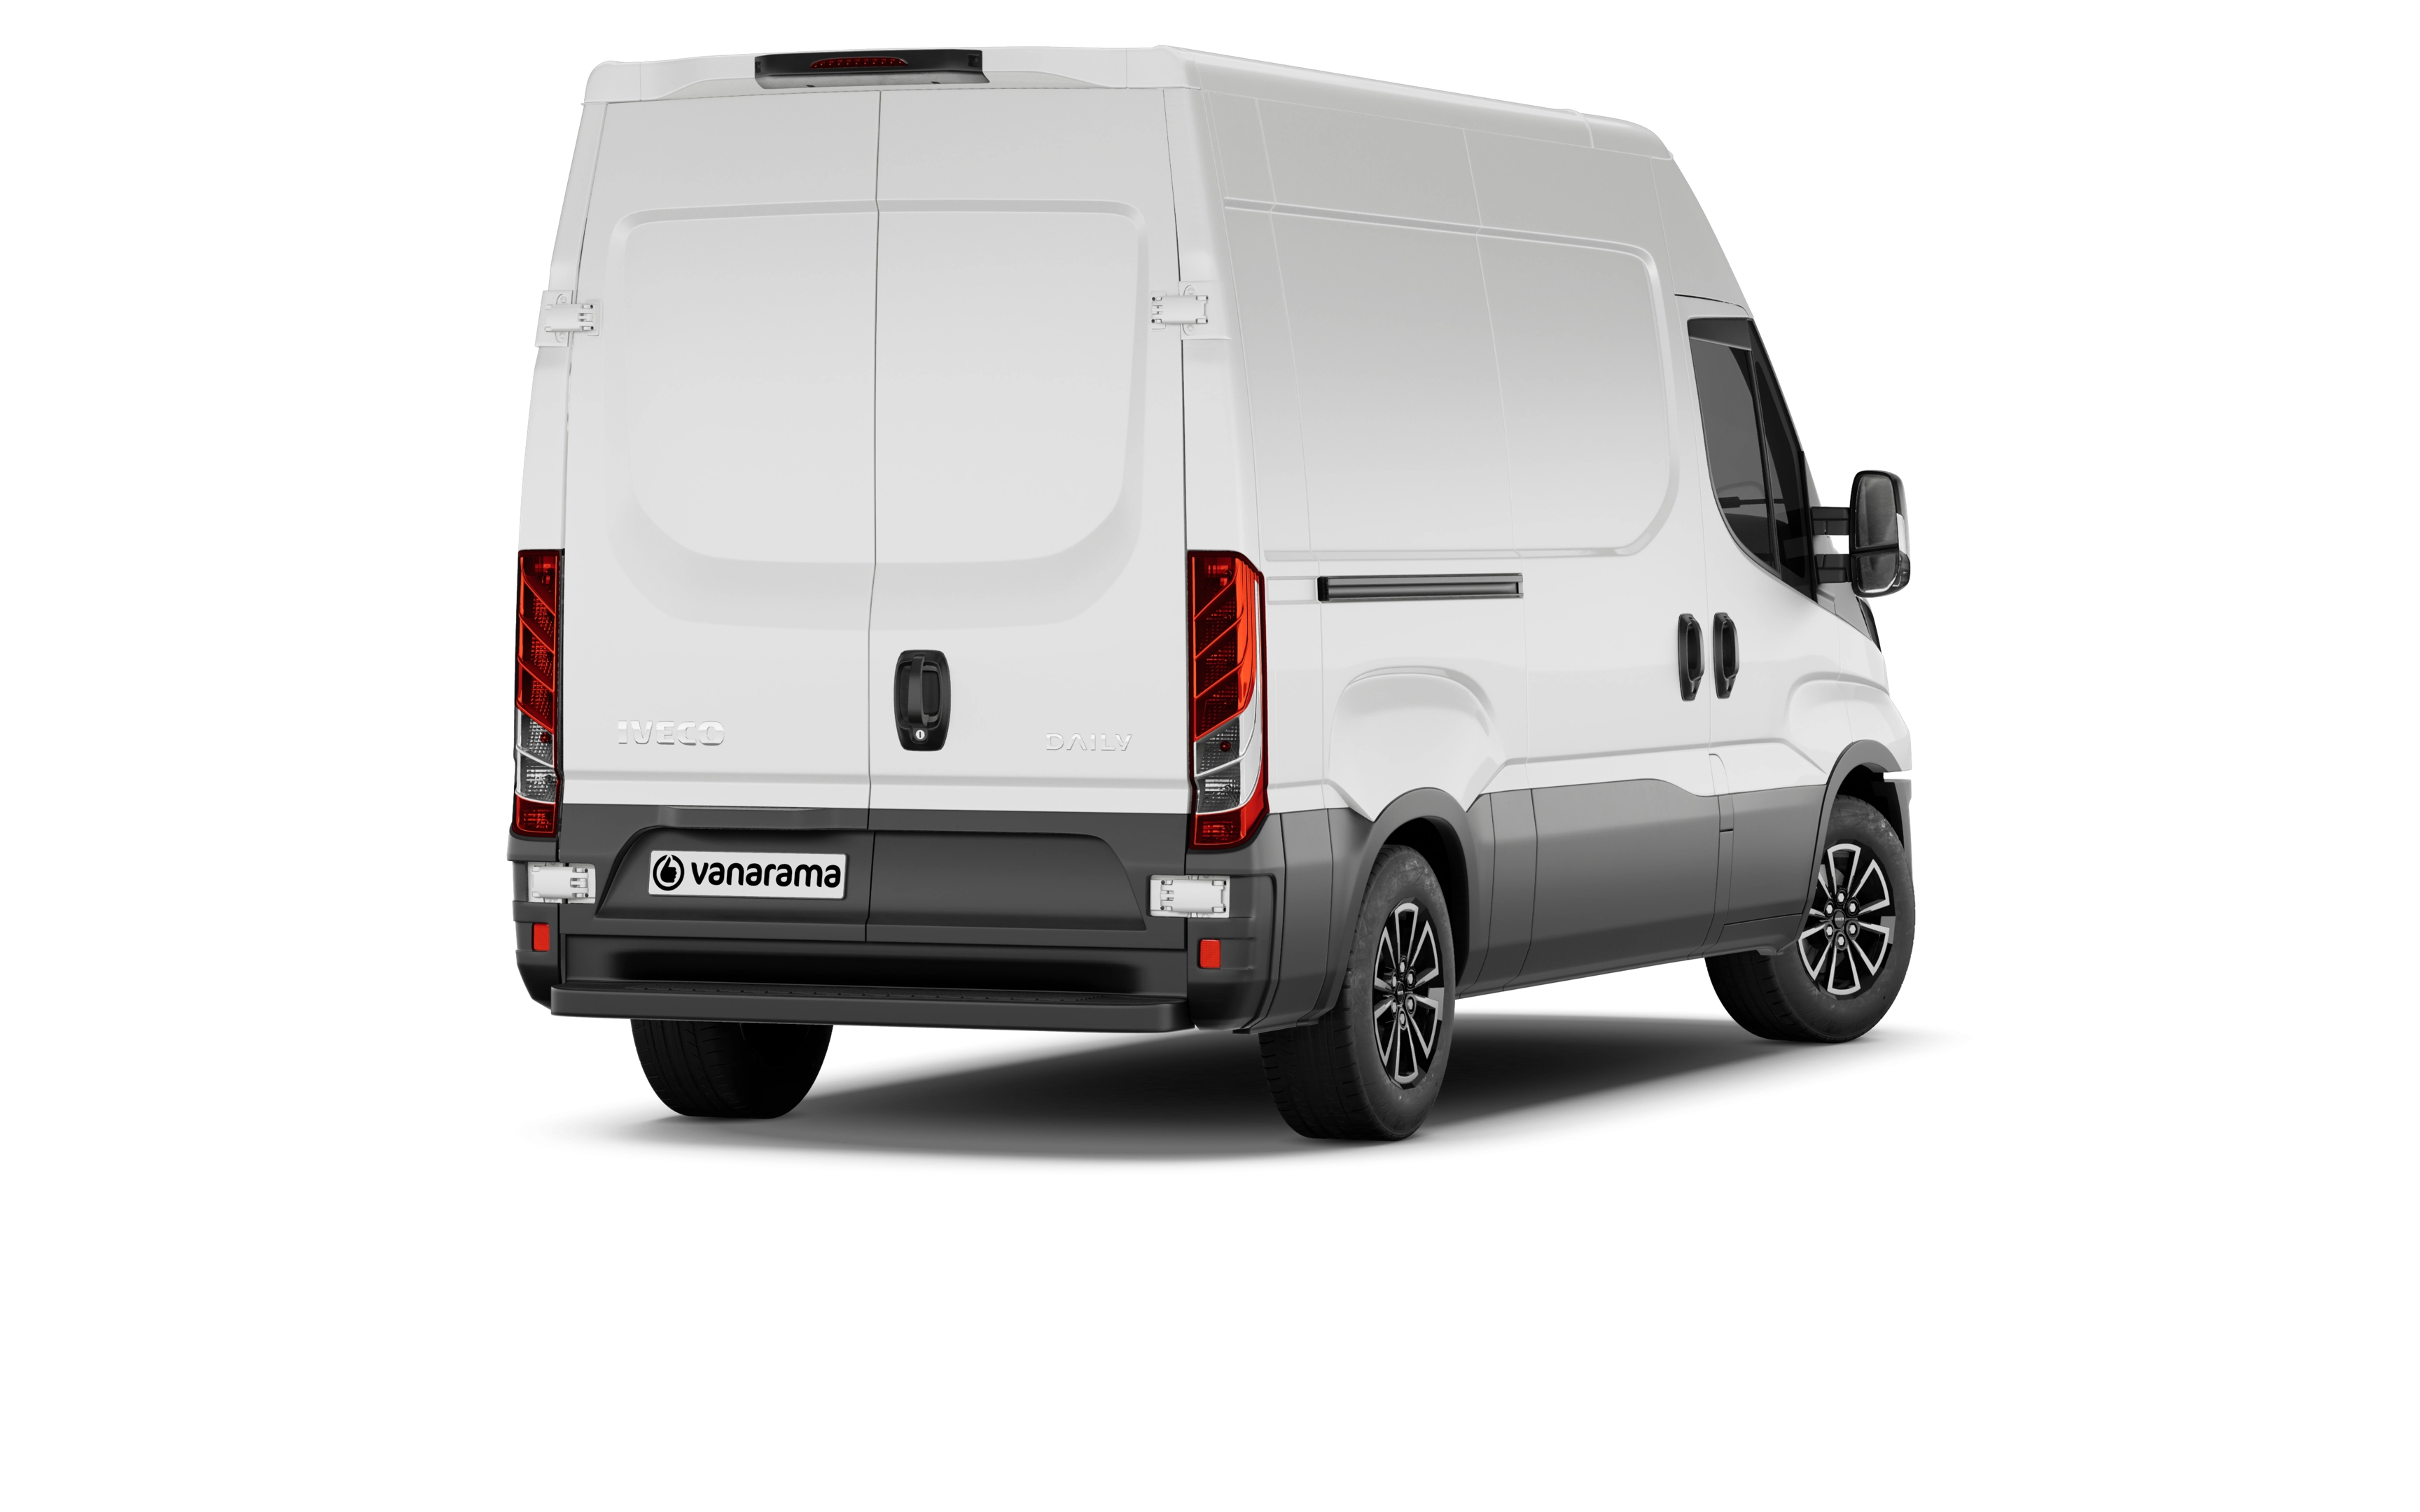 Iveco edaily 35s14 electric 140kw 74kwh extra high/rf van 3520l wb auto [22kw]